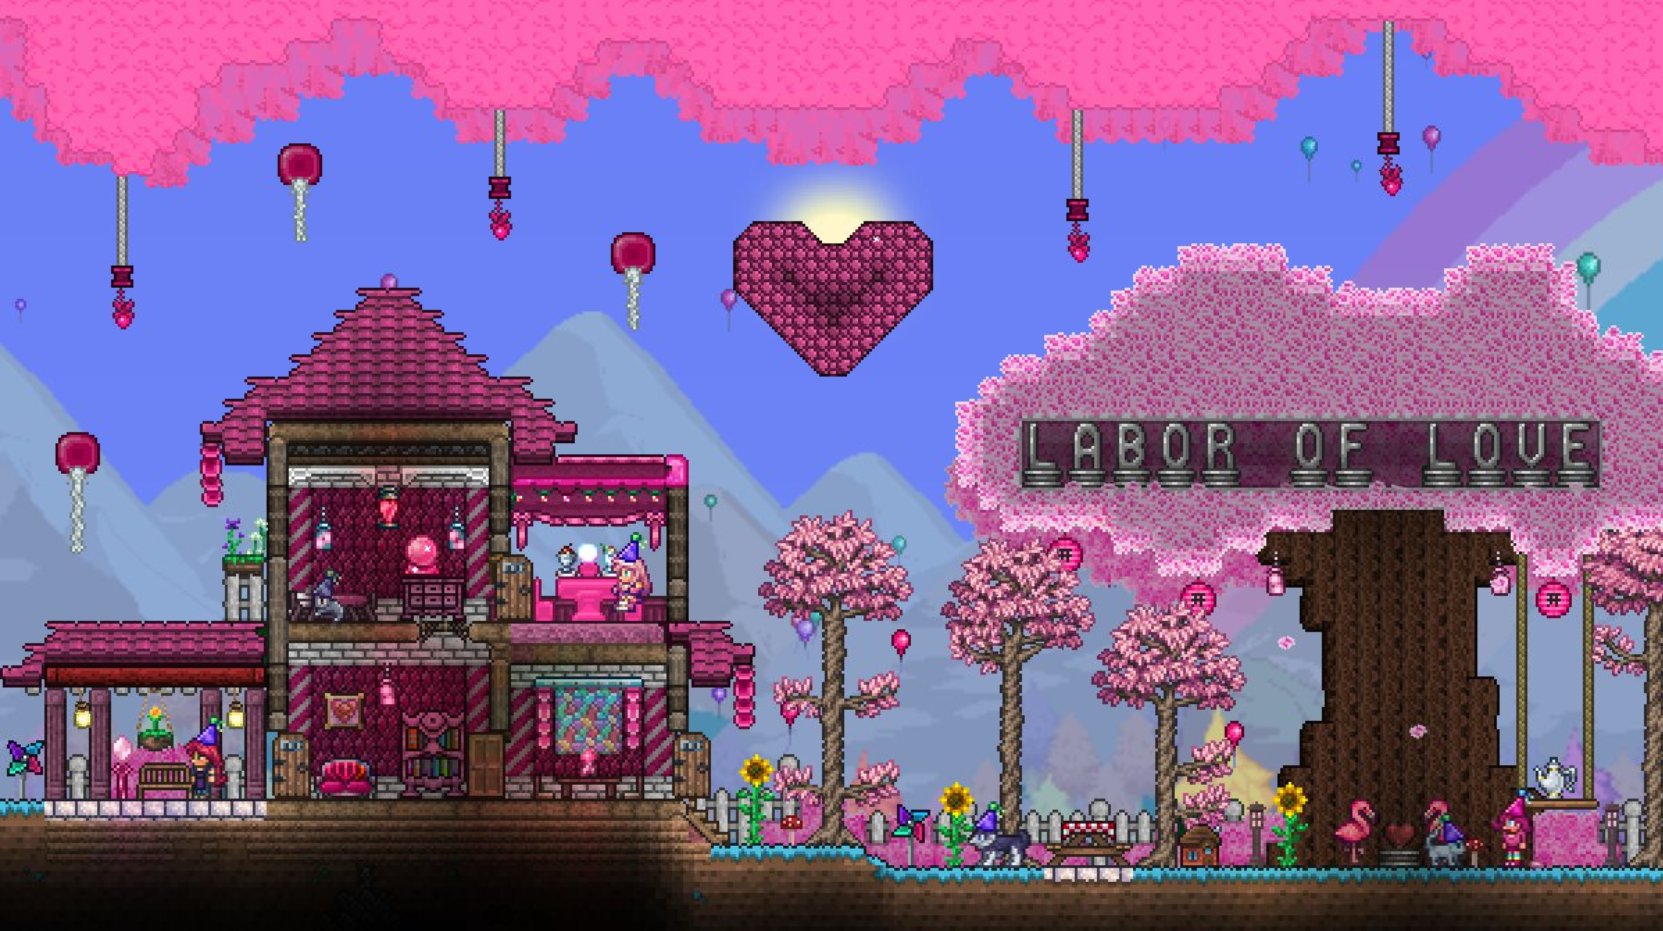 Chippy 🌳 on X: It's time for a new Terraria state of the game